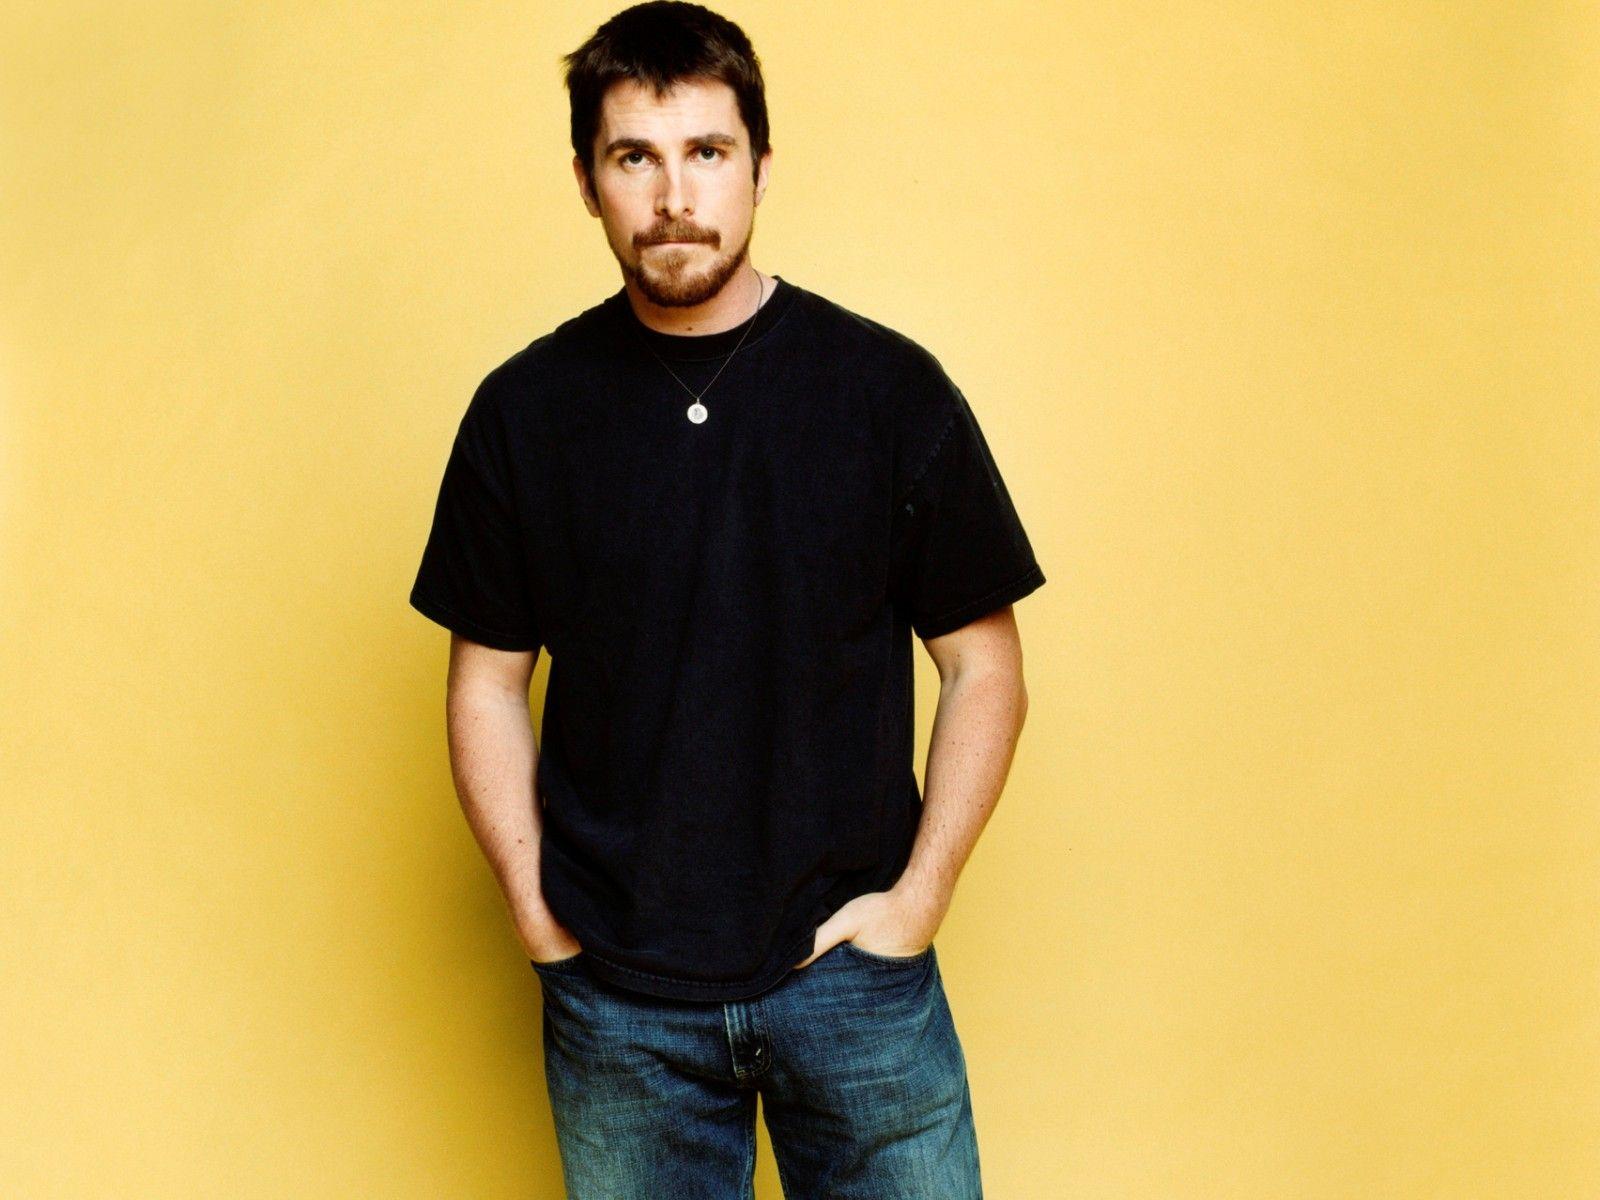 Christian Bale Amazing Wallpaper Great Picture / Wallpaper